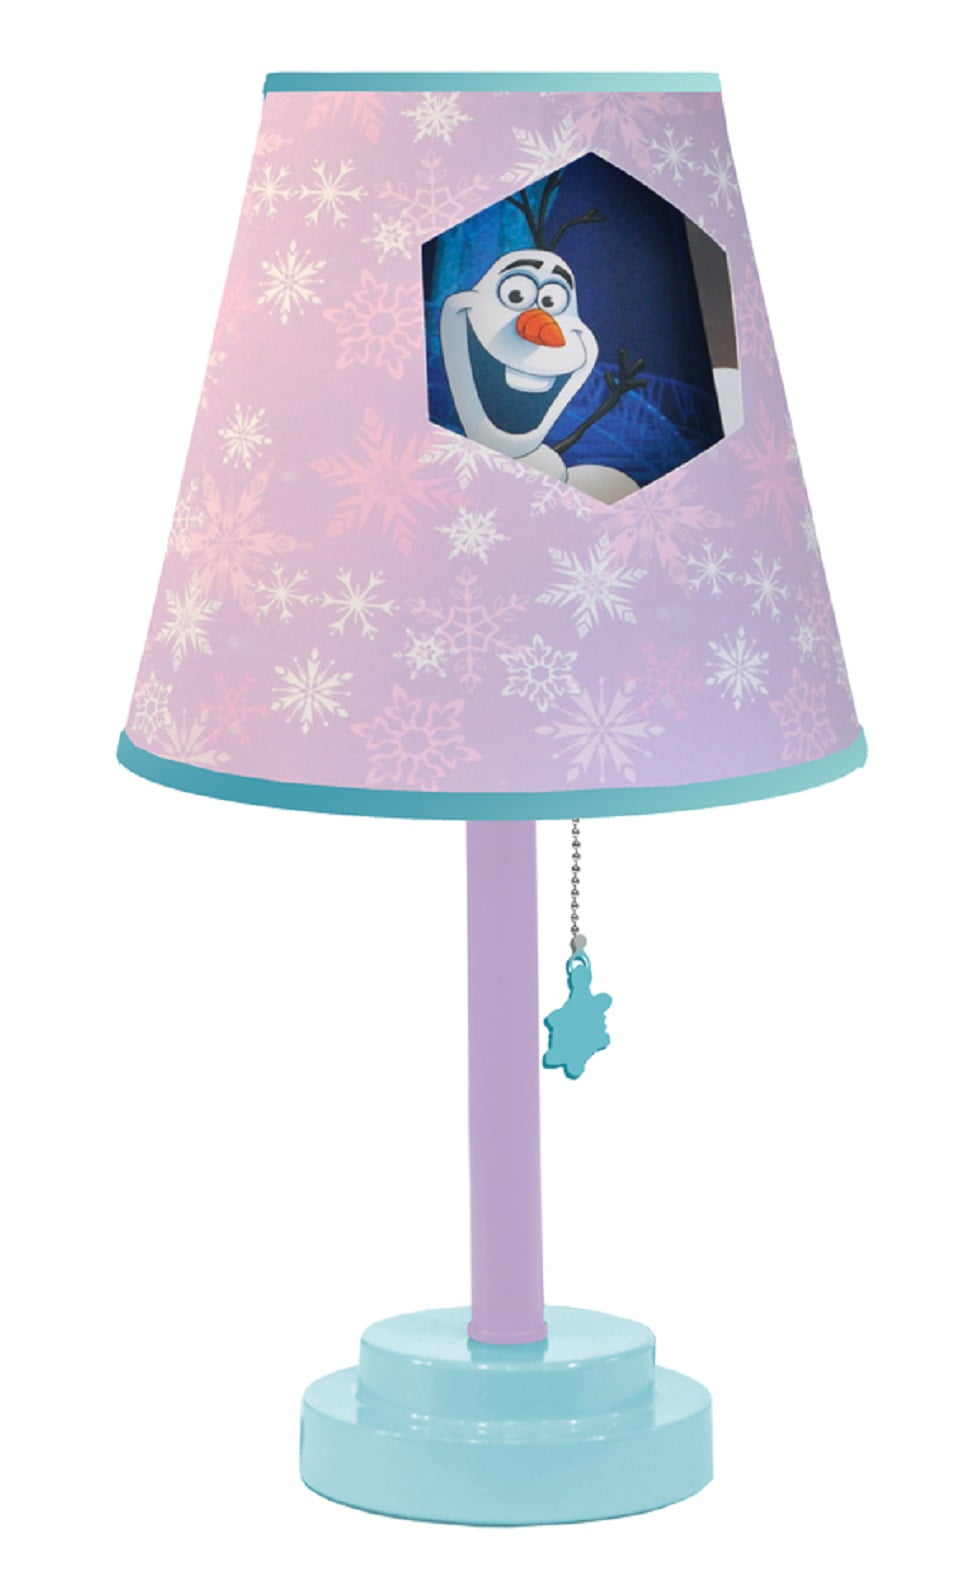 Themed Printed Decorative Disney Frozen 2 Stick Table Kids Lamp with Pull Chain 